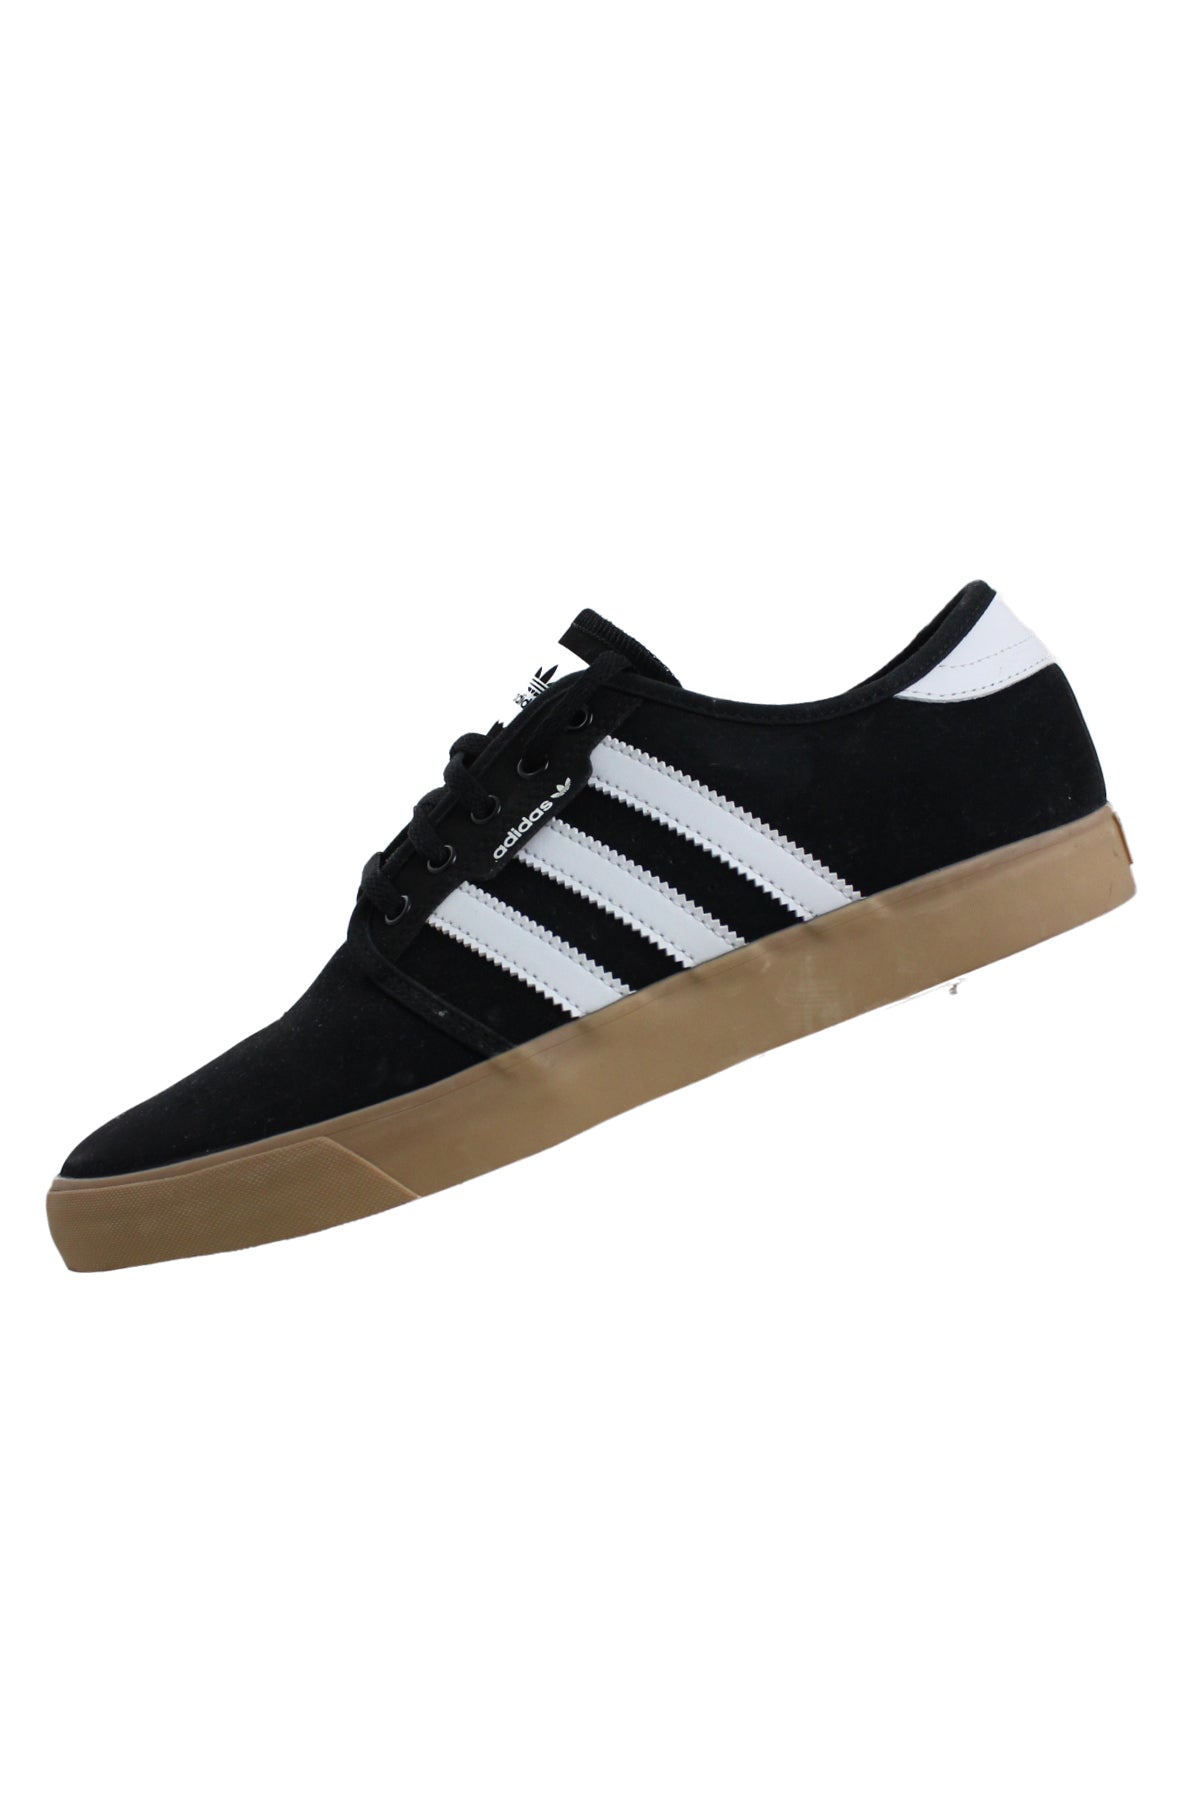 side angle of adidas black/white shoes features ‘adidas’ logo printed at tongue, ‘adidas’ logo tab at sides/back of gum sole, three stripes at sides, and top flat lace closure.